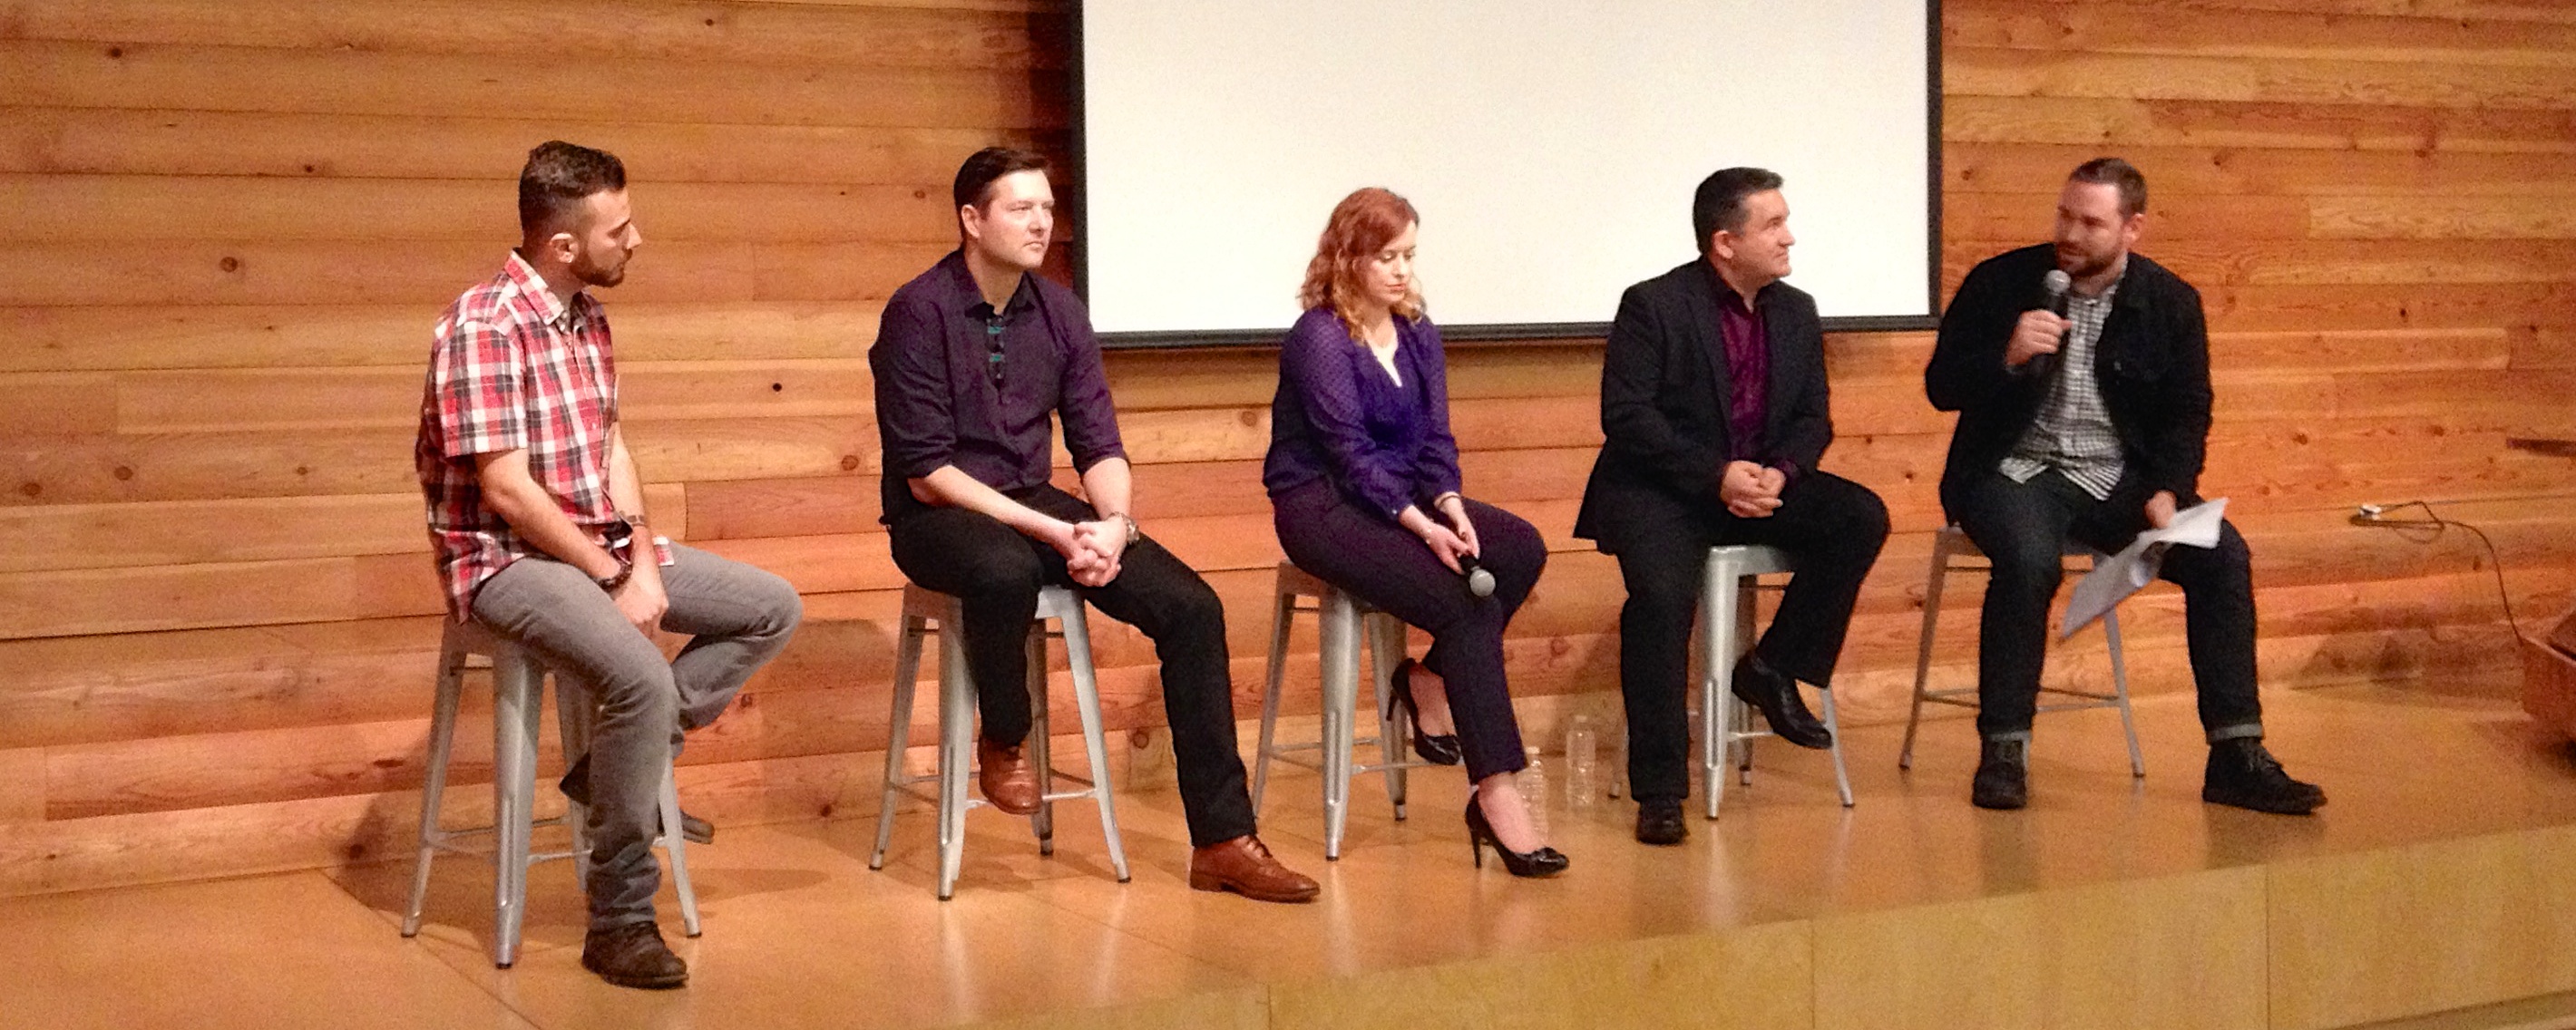 Panelists at the #TellEveryone event in Vancouver